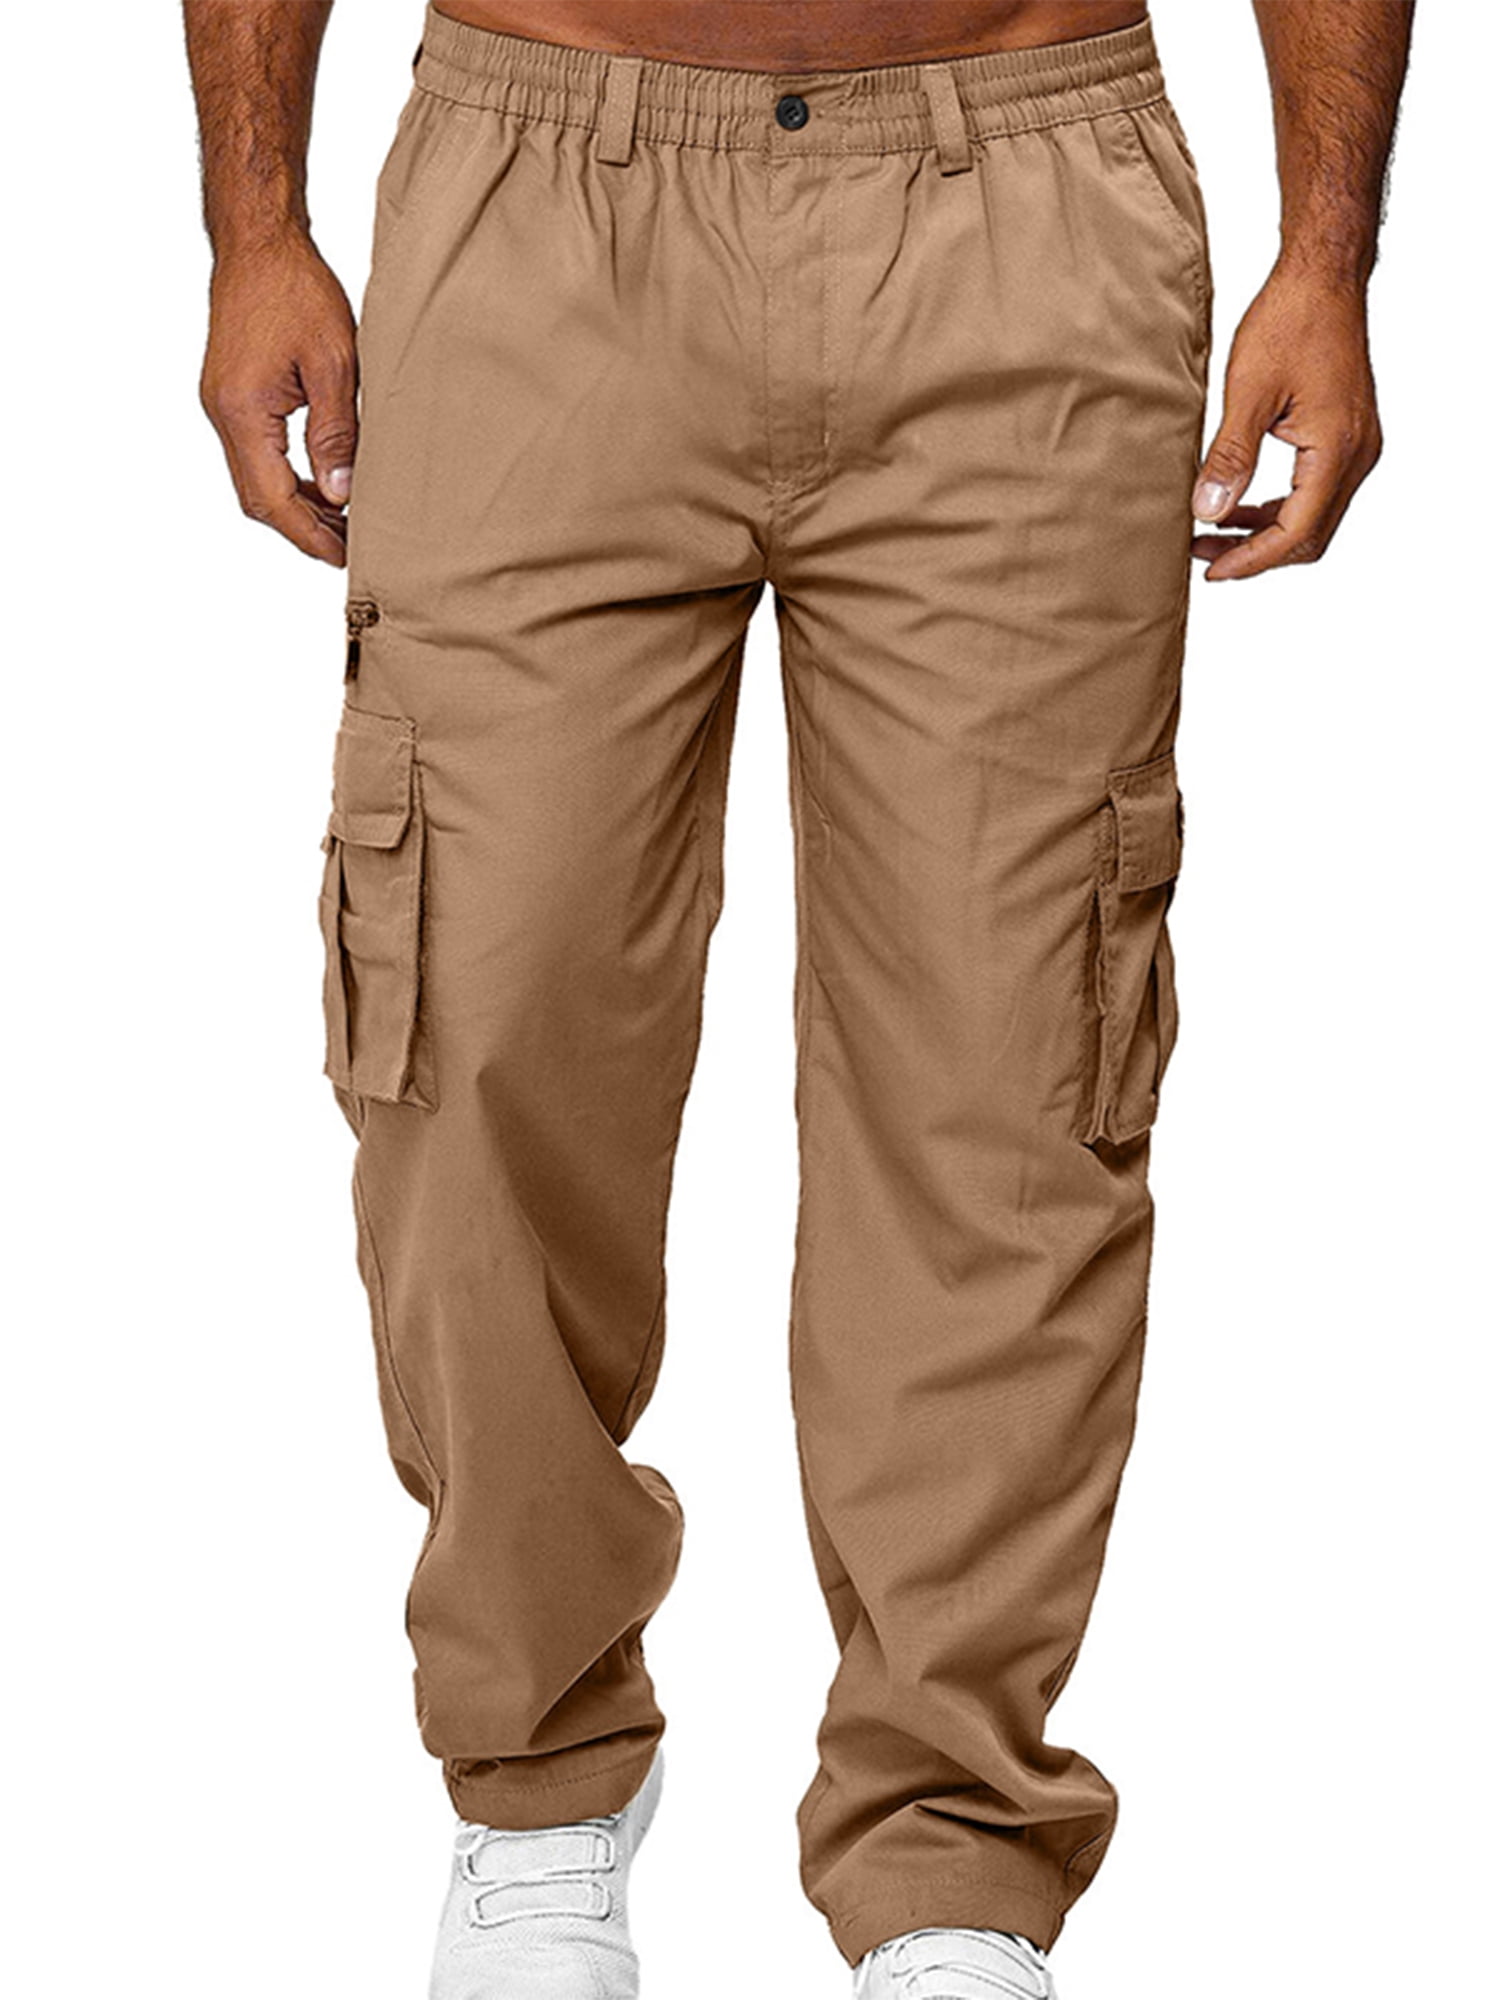 Xysaqa Men's Big & Tall Relaxed Fitted Cargo Pants, Mens Casual Cotton  Multi-Pockets Stretch Overalls Outdoor Work Pants Trousers S-6XL -  Walmart.com